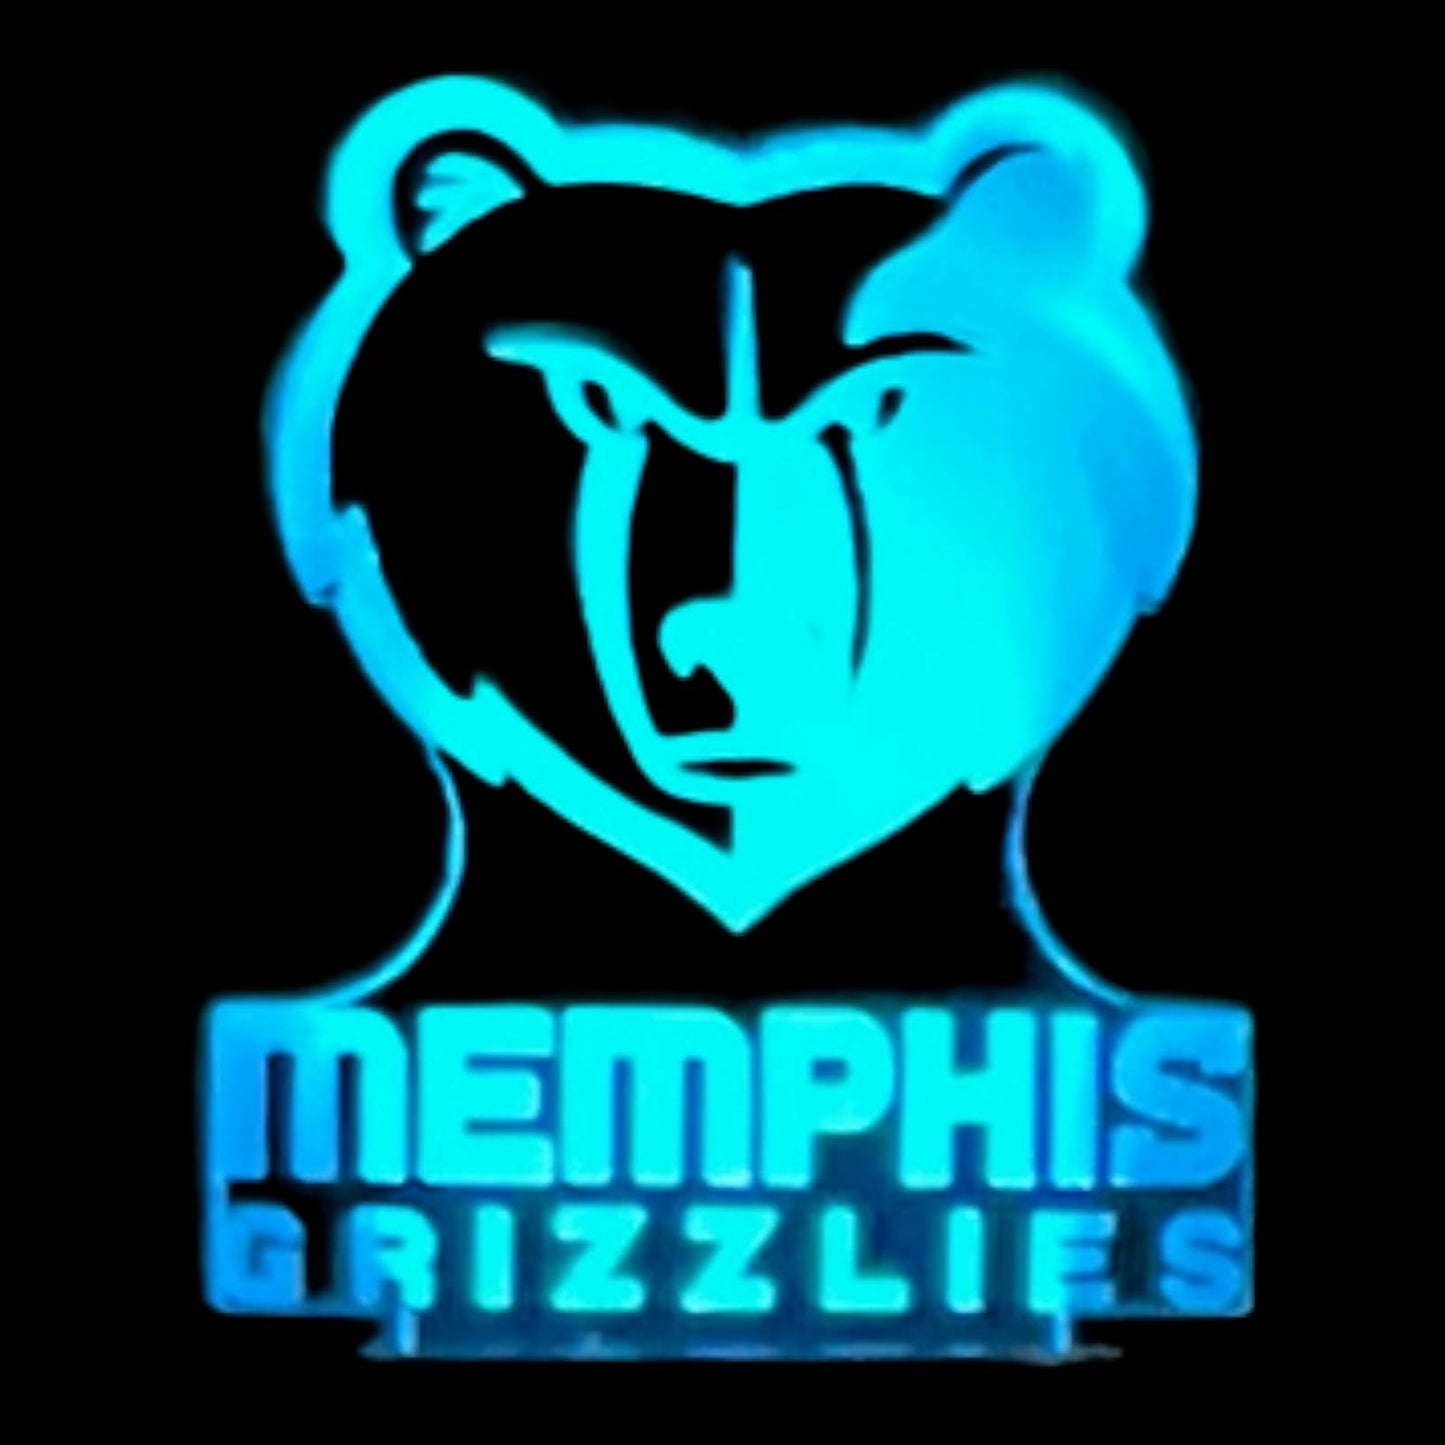 Memphis Grizzlies 3D LED Night-Light 7 Color Changing Lamp w/ Touch Switch